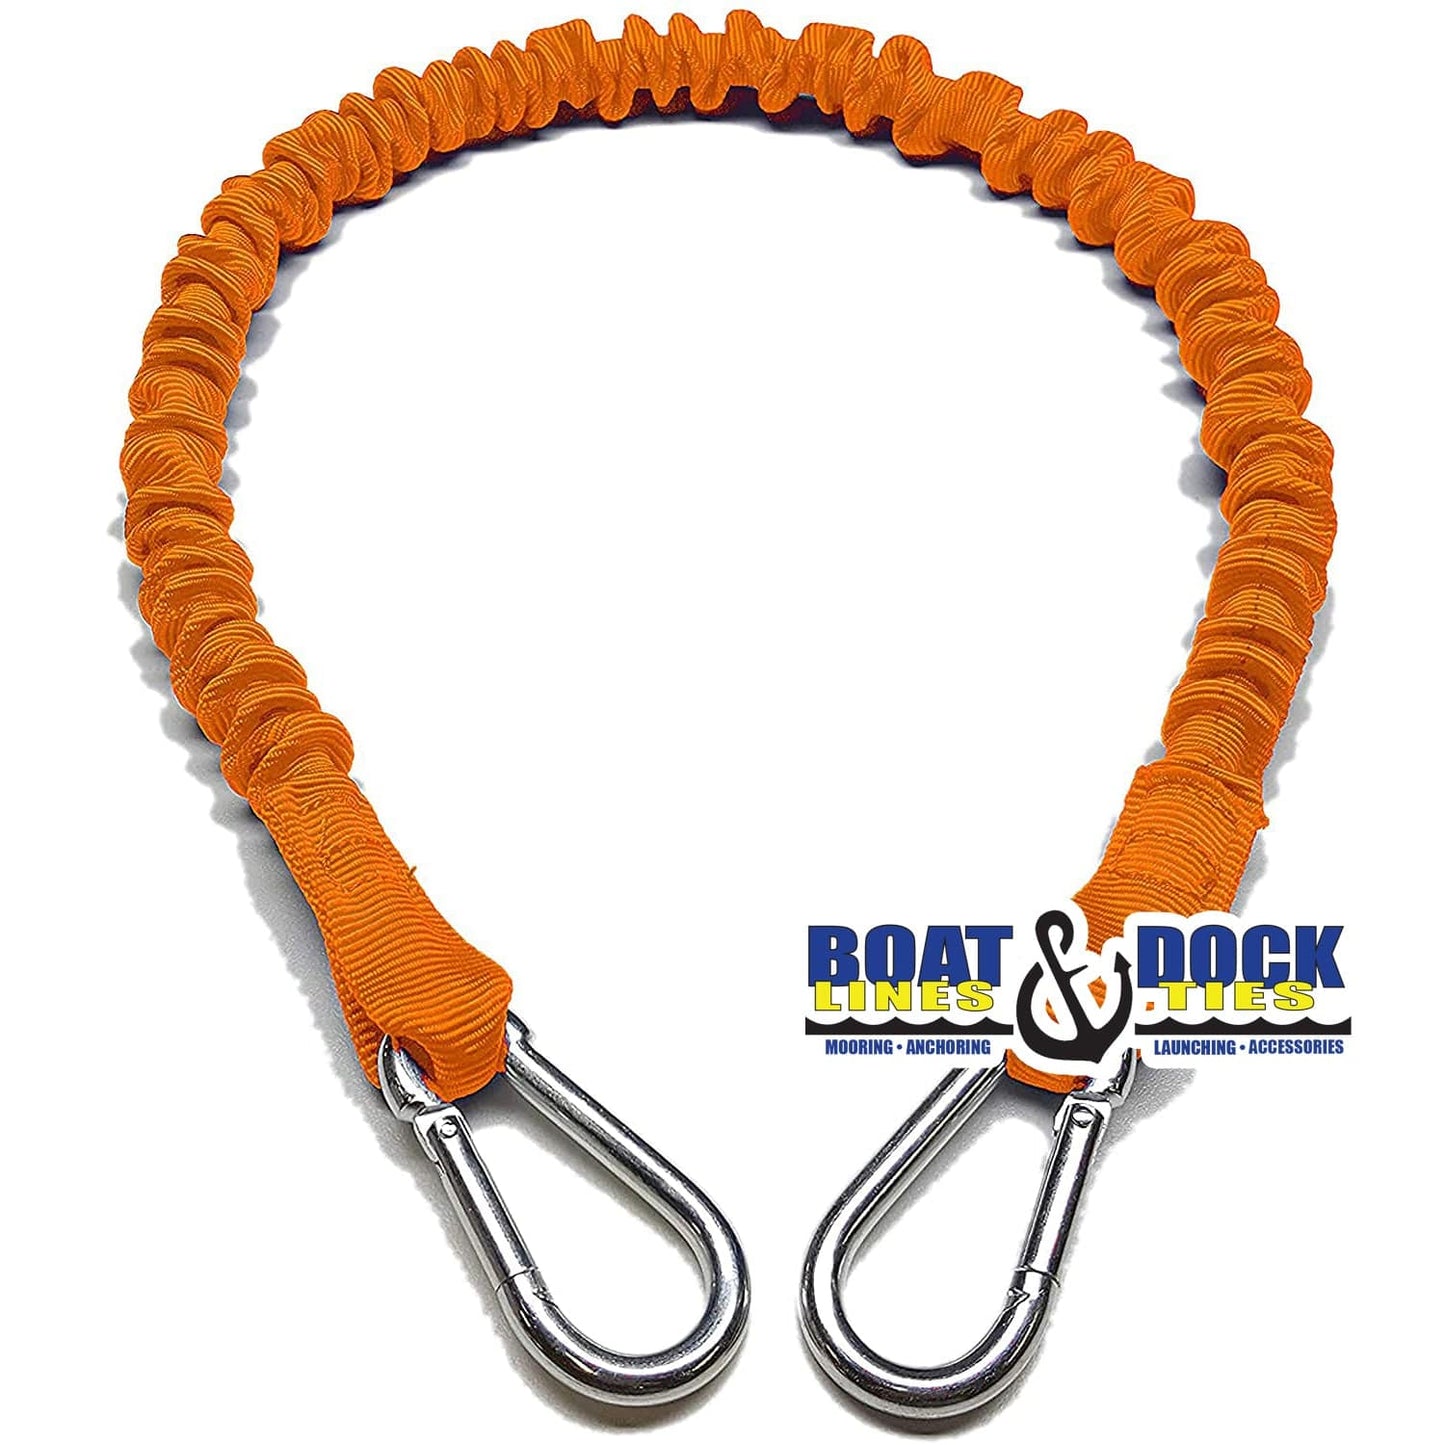 Boat Dock Tie Bungee Cords, 2 Hooked Ends, UV Protected Bungee Cords - Set of 2 - Made in USA - Boat Lines & Dock Ties Boat Lines & Dock Ties 24" / Orange